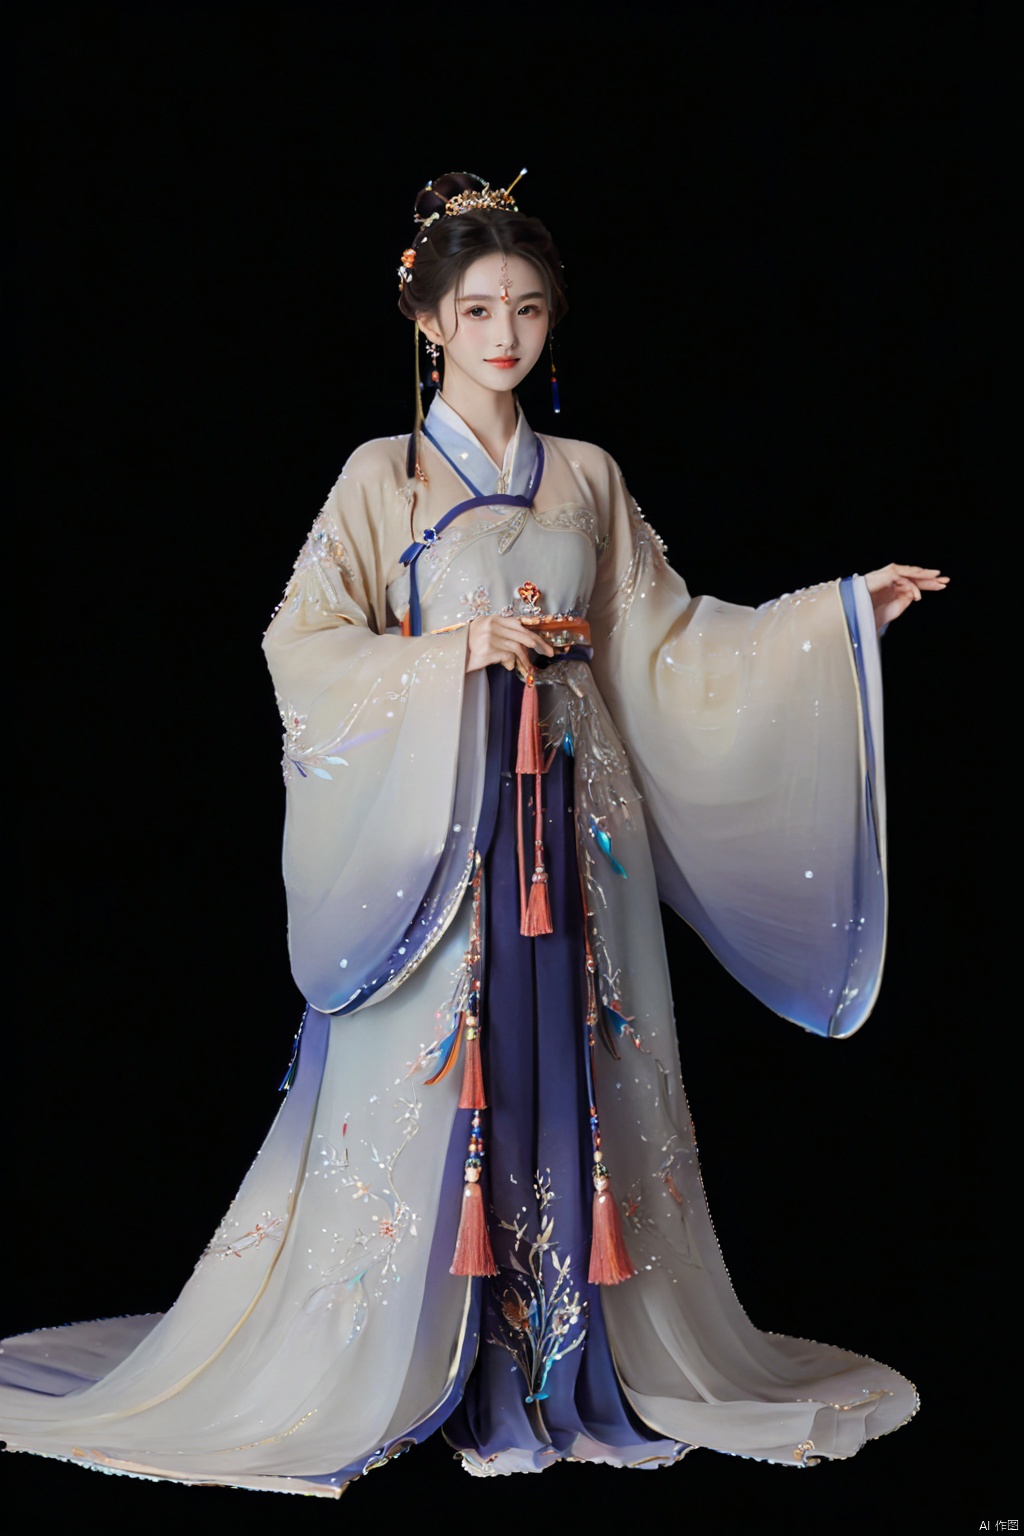 1.3, Masterpiece, Highest Quality, High Resolution, Details: 1.2, 1 Girl, Bun, Hairpin, Beautiful Face, Delicate Eyes, Tassel Earrings, Necklaces, Bracelets, Hanfu, Su Embroidered Hanfu, Streamers, Ribbons, Elegant Stand Posture, Aesthetics, Movie Lighting, Ray Tracing, Depth of Field, Layering,Fluttering, Hanfu, qingsha
Negative Prompt：ugly, tiling, poorly drawn hands, poorly drawn feet, poorly drawn face, out of frame, extra limbs, disfigured, deformed, body out of frame, bad anatomy, watermark, signature, cut off, low contrast, underexposed, overexposed, bad art, beginner, *******, distorted face